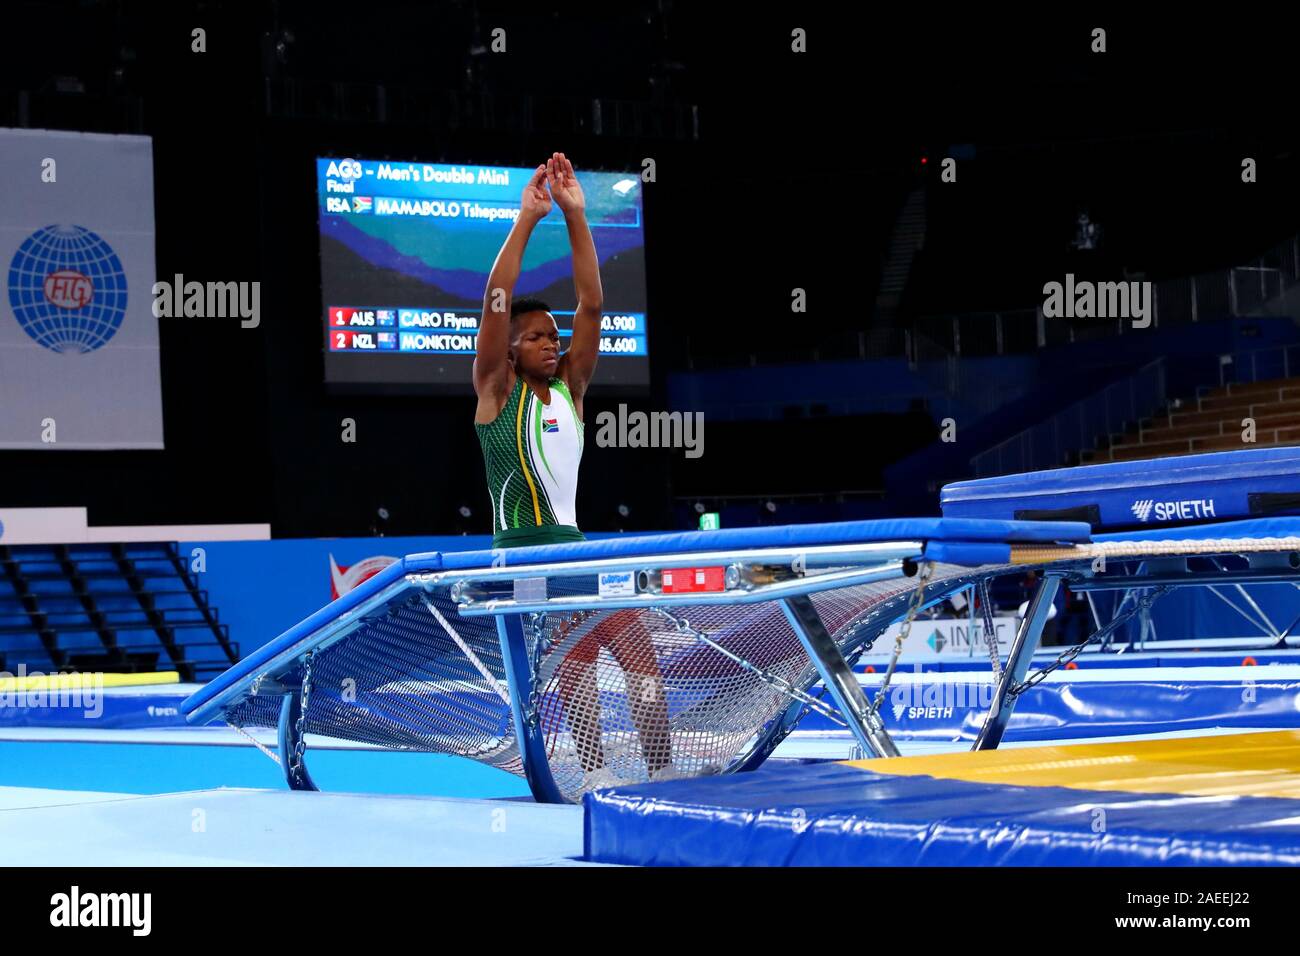 Tokyo, Japan. 8th Dec, Tshepang Mamabolo (RSA), December 8, - Trampoline : 27th FIG Trampoline Gymnastics World Age Group Competitions, Men's Double Mini (ages of 15-16) Final at Ariake Gymnastics